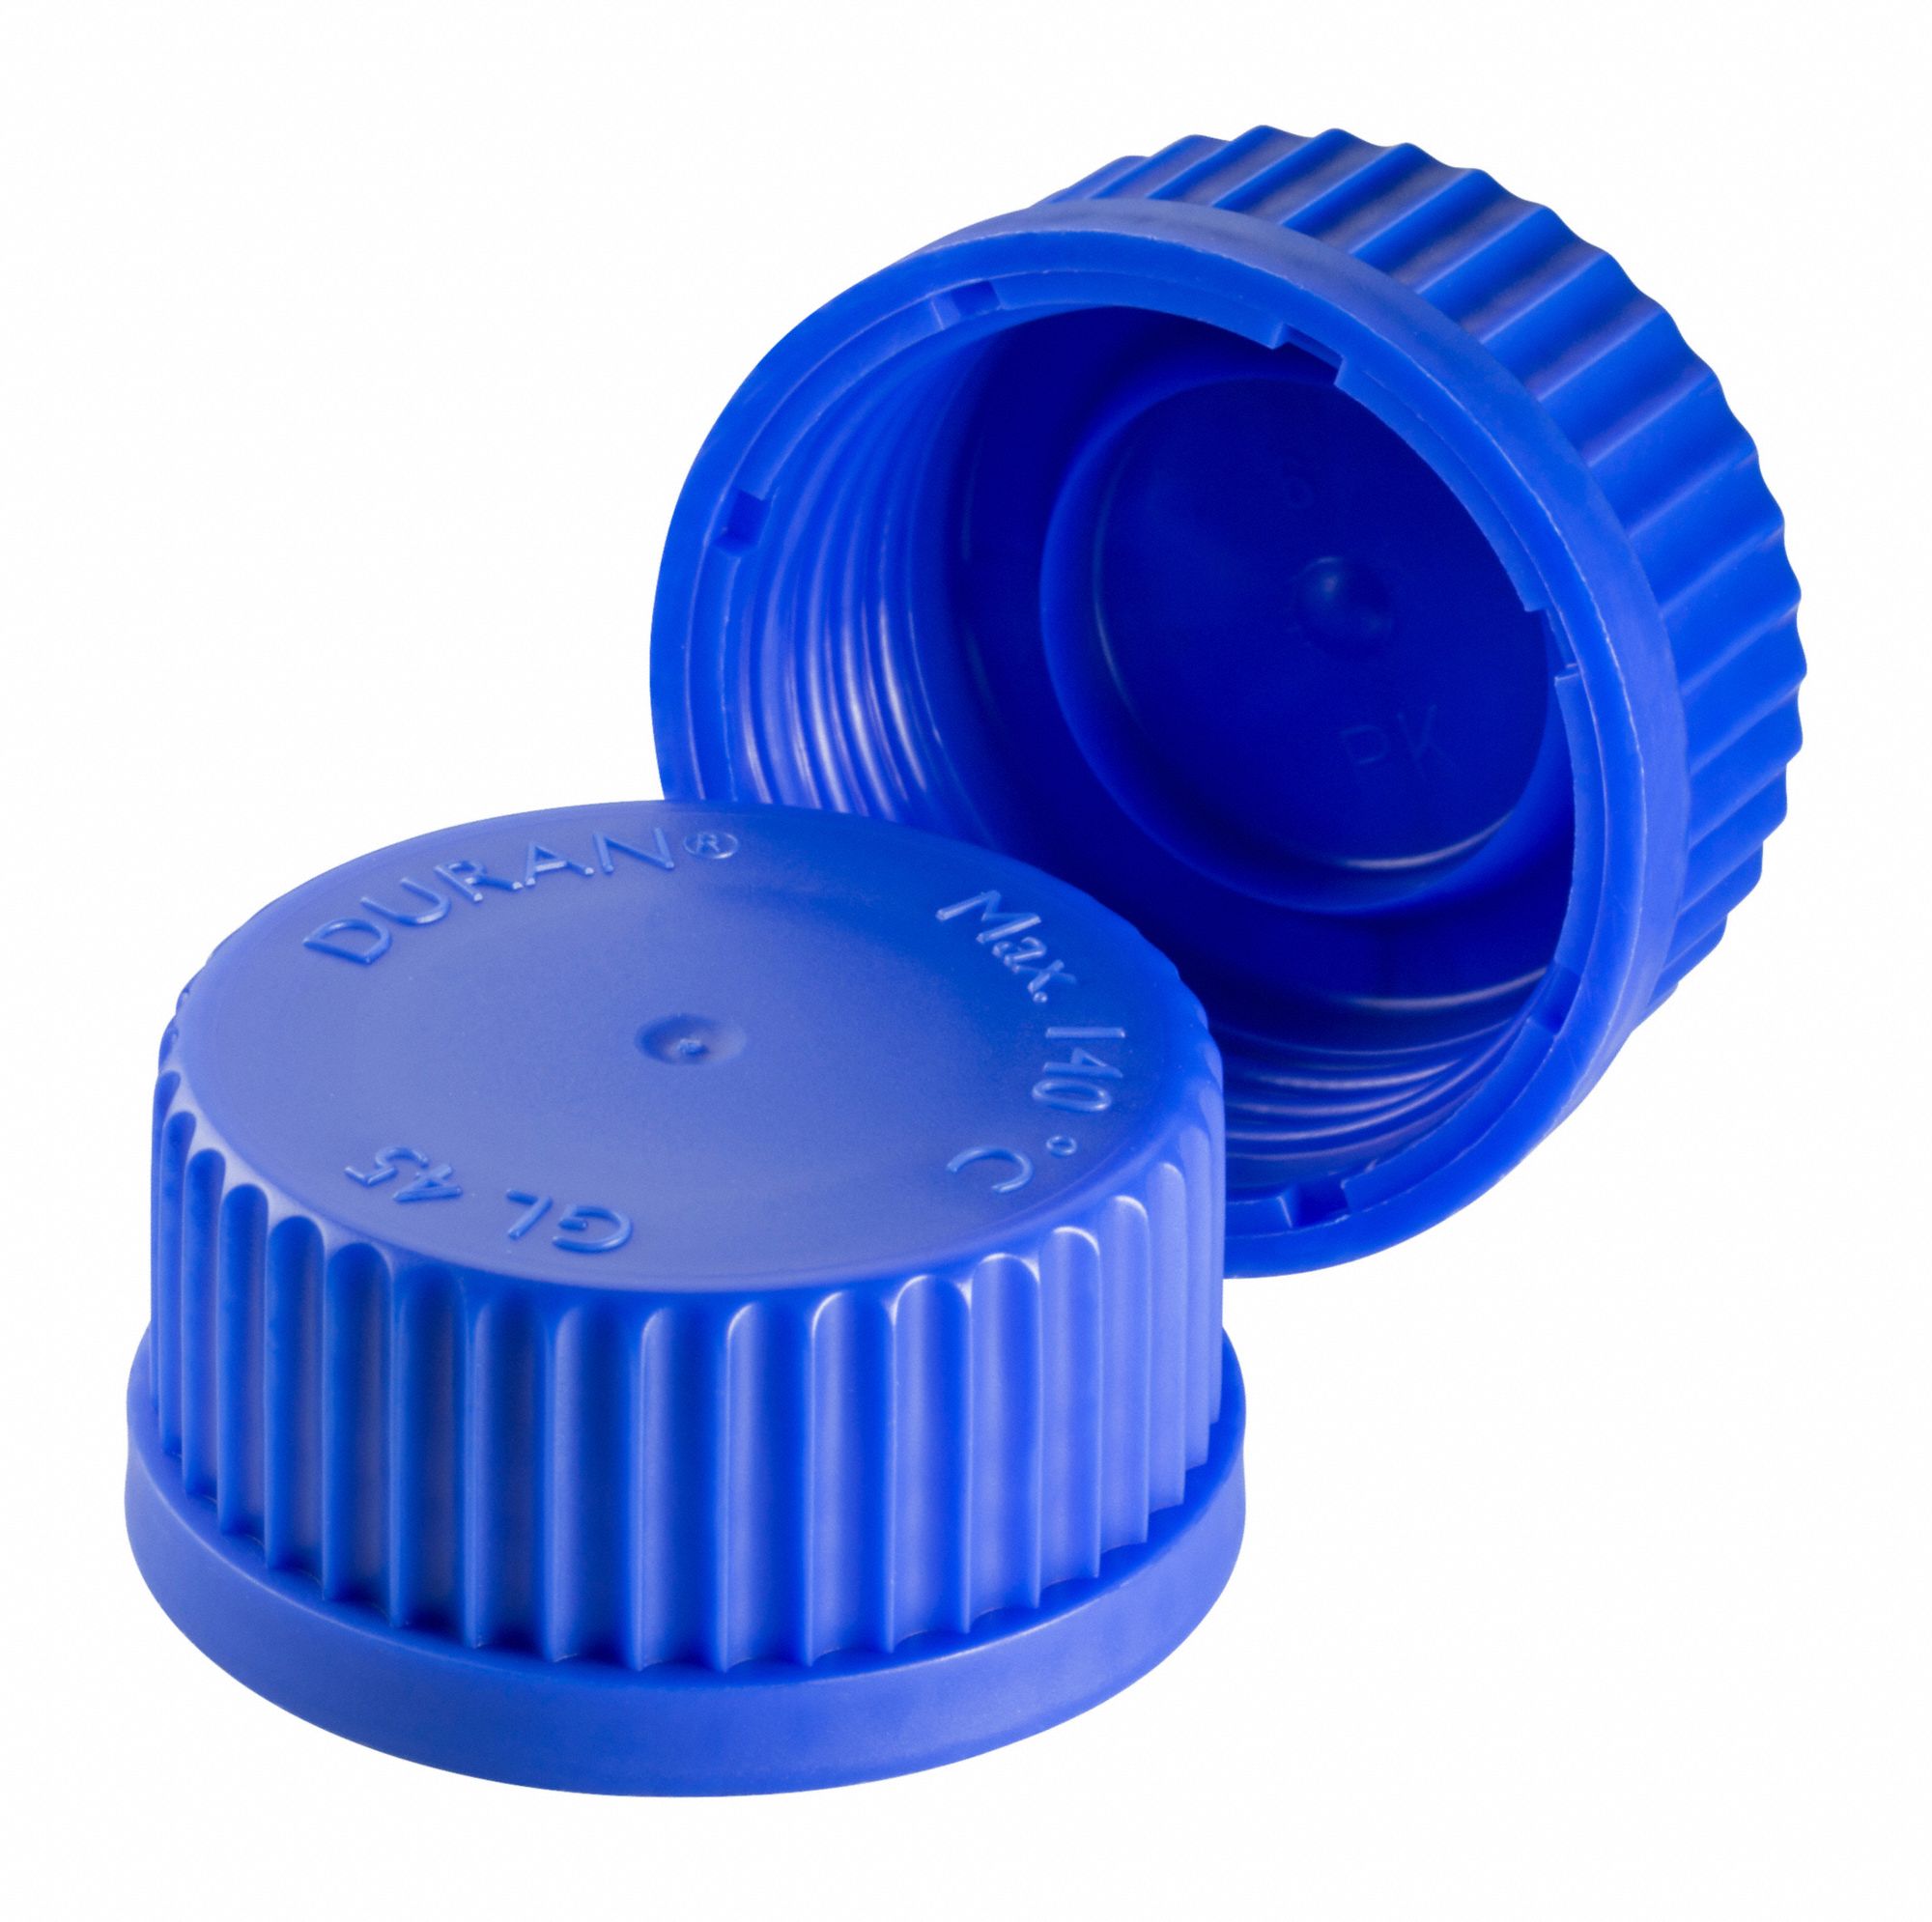 Screw Cap: GL45 Labware Screw Closure Size, Polypropylene, Unlined, Molded-In Seal Ring, 10 PK